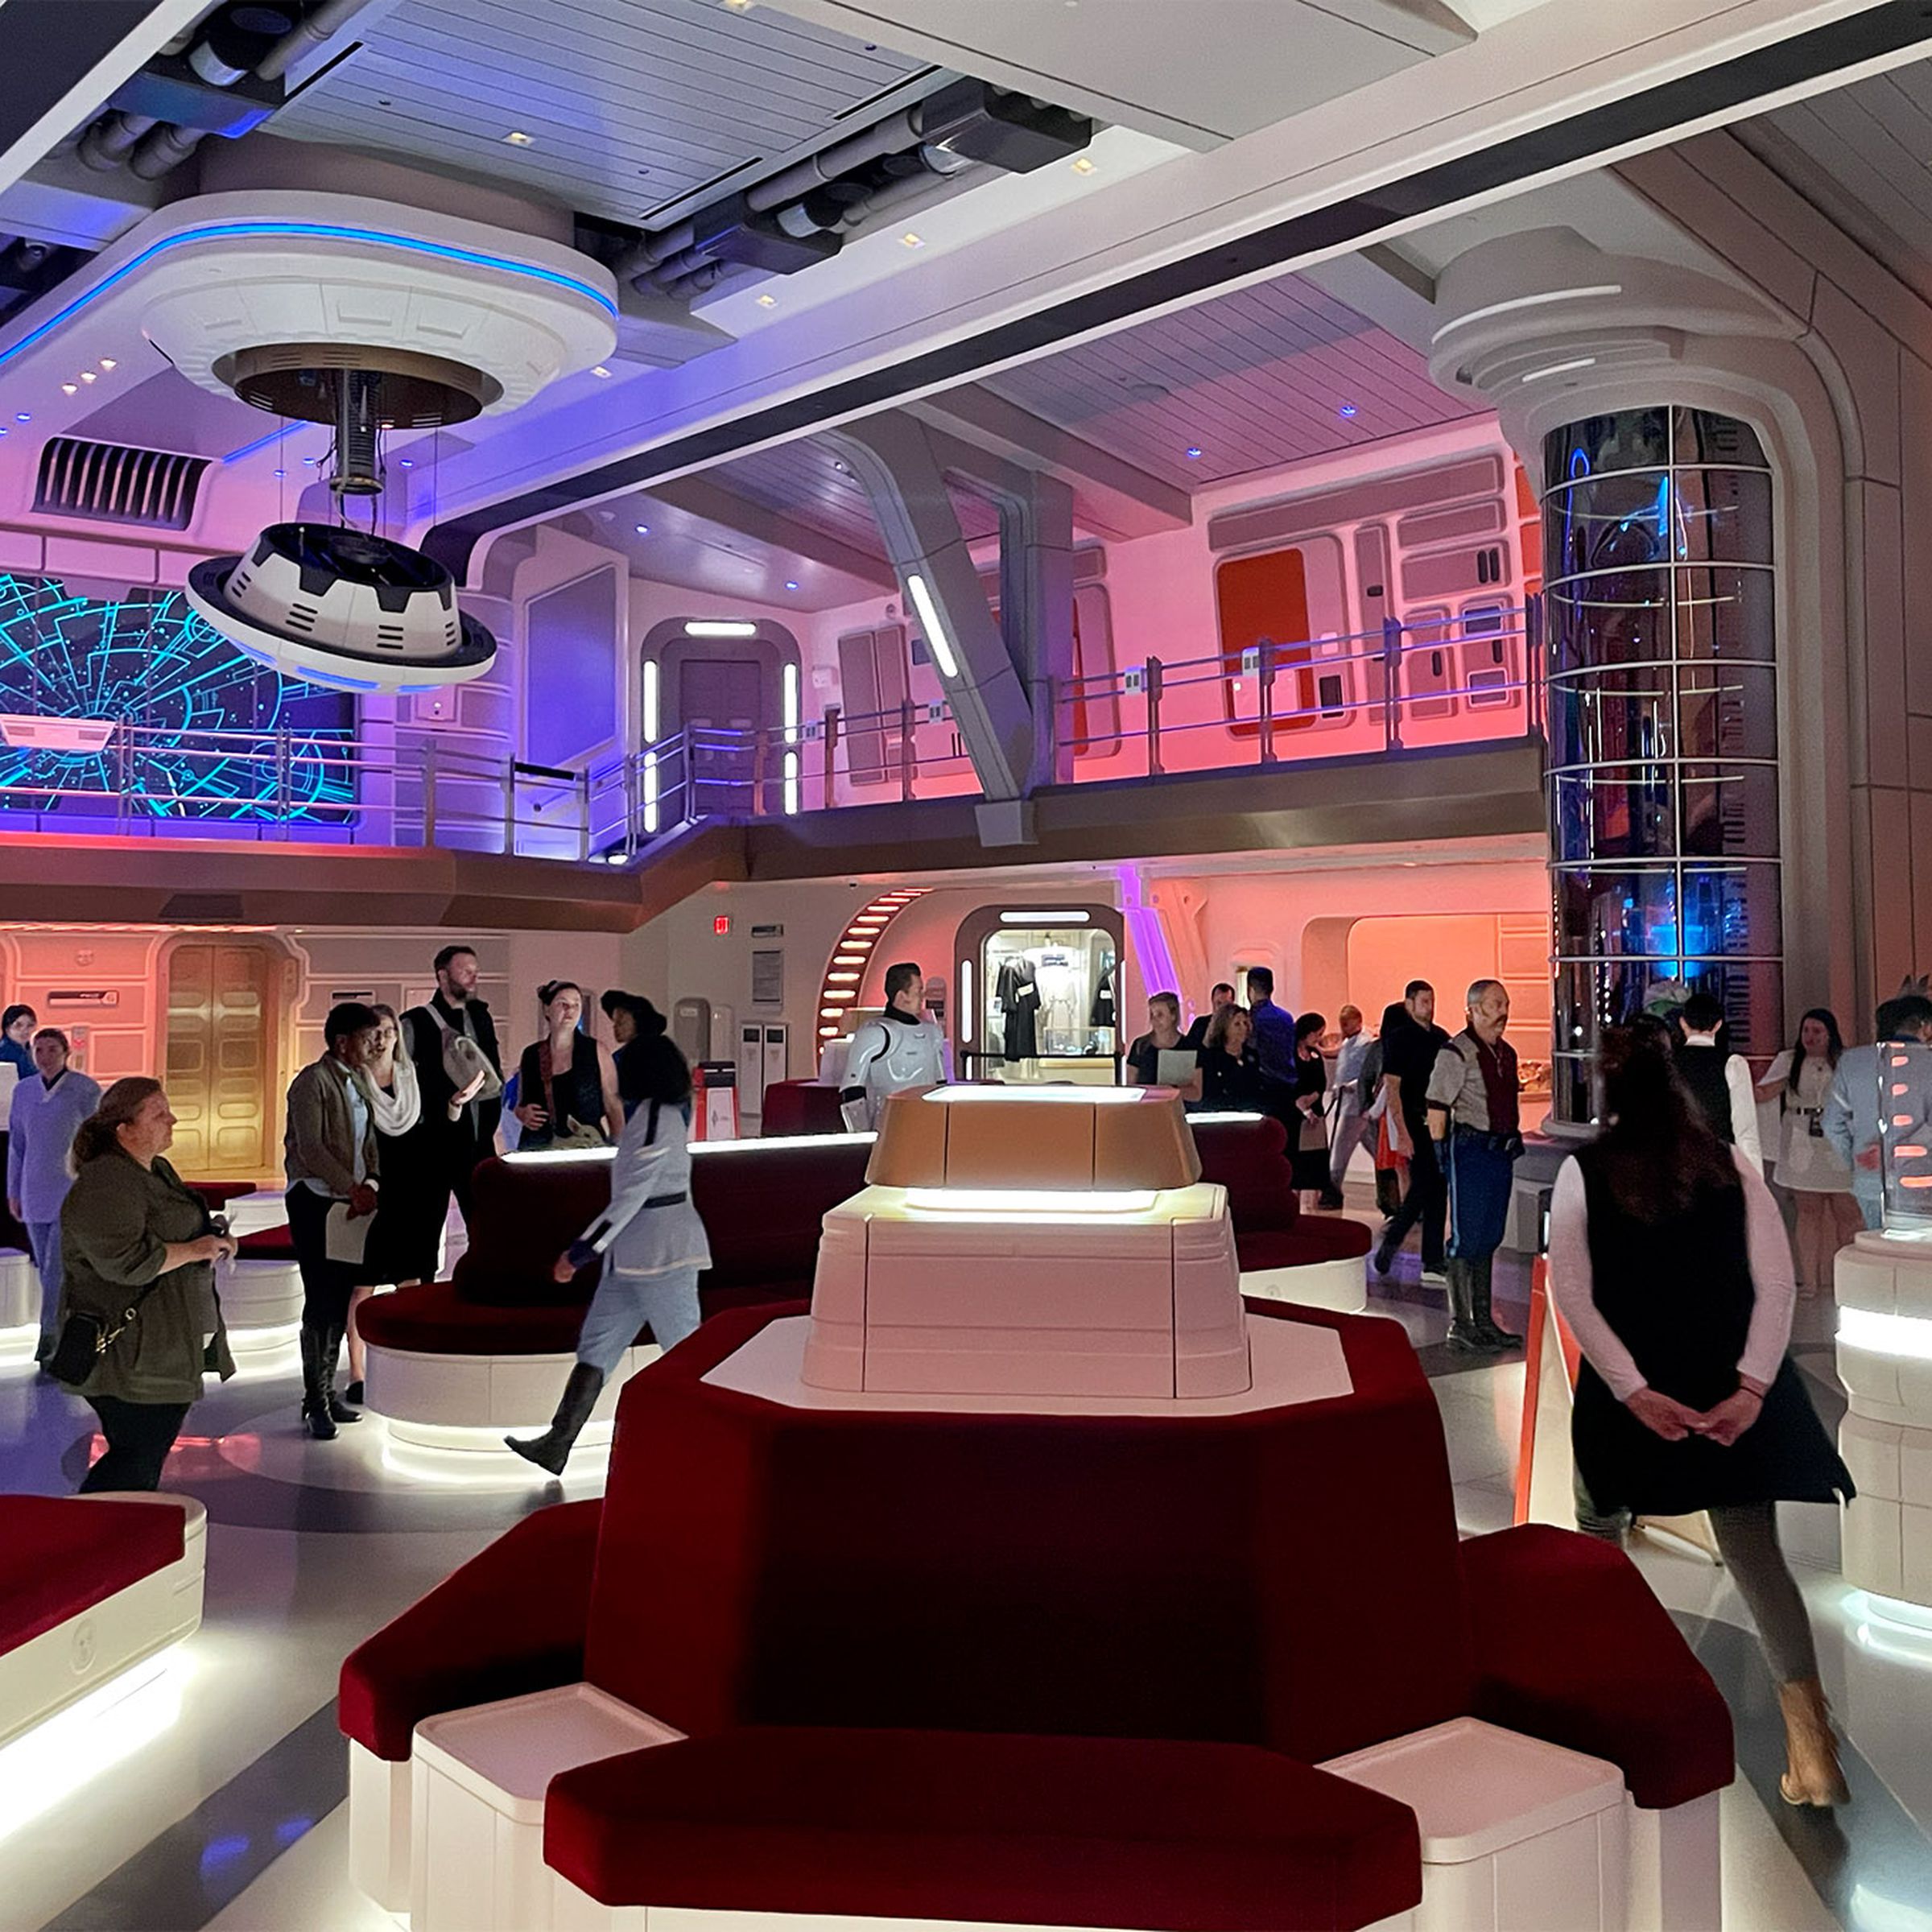 Galactic Starcruiser invites guests to live in the Star Wars universe for a two-day trip.